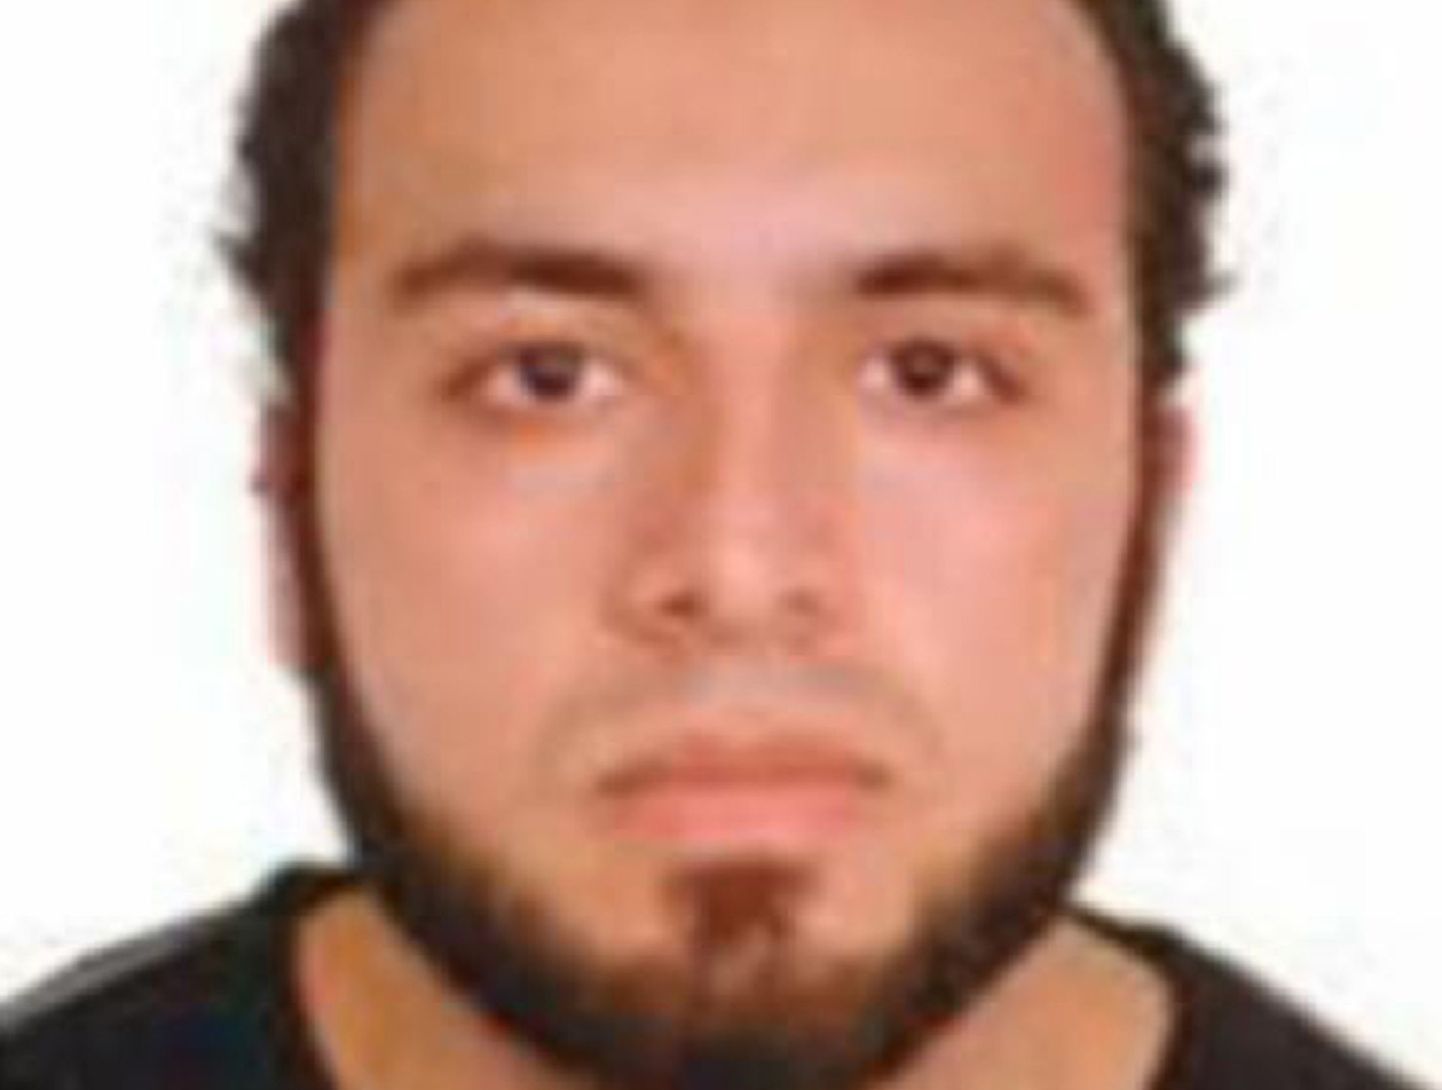 An image of Ahmad Khan Rahami, who is wanted for questioning in connection with an explosion in New York City, is seen in a a poster released by the Federal Bureau of Investigation (FBI) on September 19, 2016.  Courtesy FBI/Handout via REUTERS    ATTENTION EDITORS - THIS IMAGE WAS PROVIDED BY A THIRD PARTY. FOR EDITORIAL USE ONLY